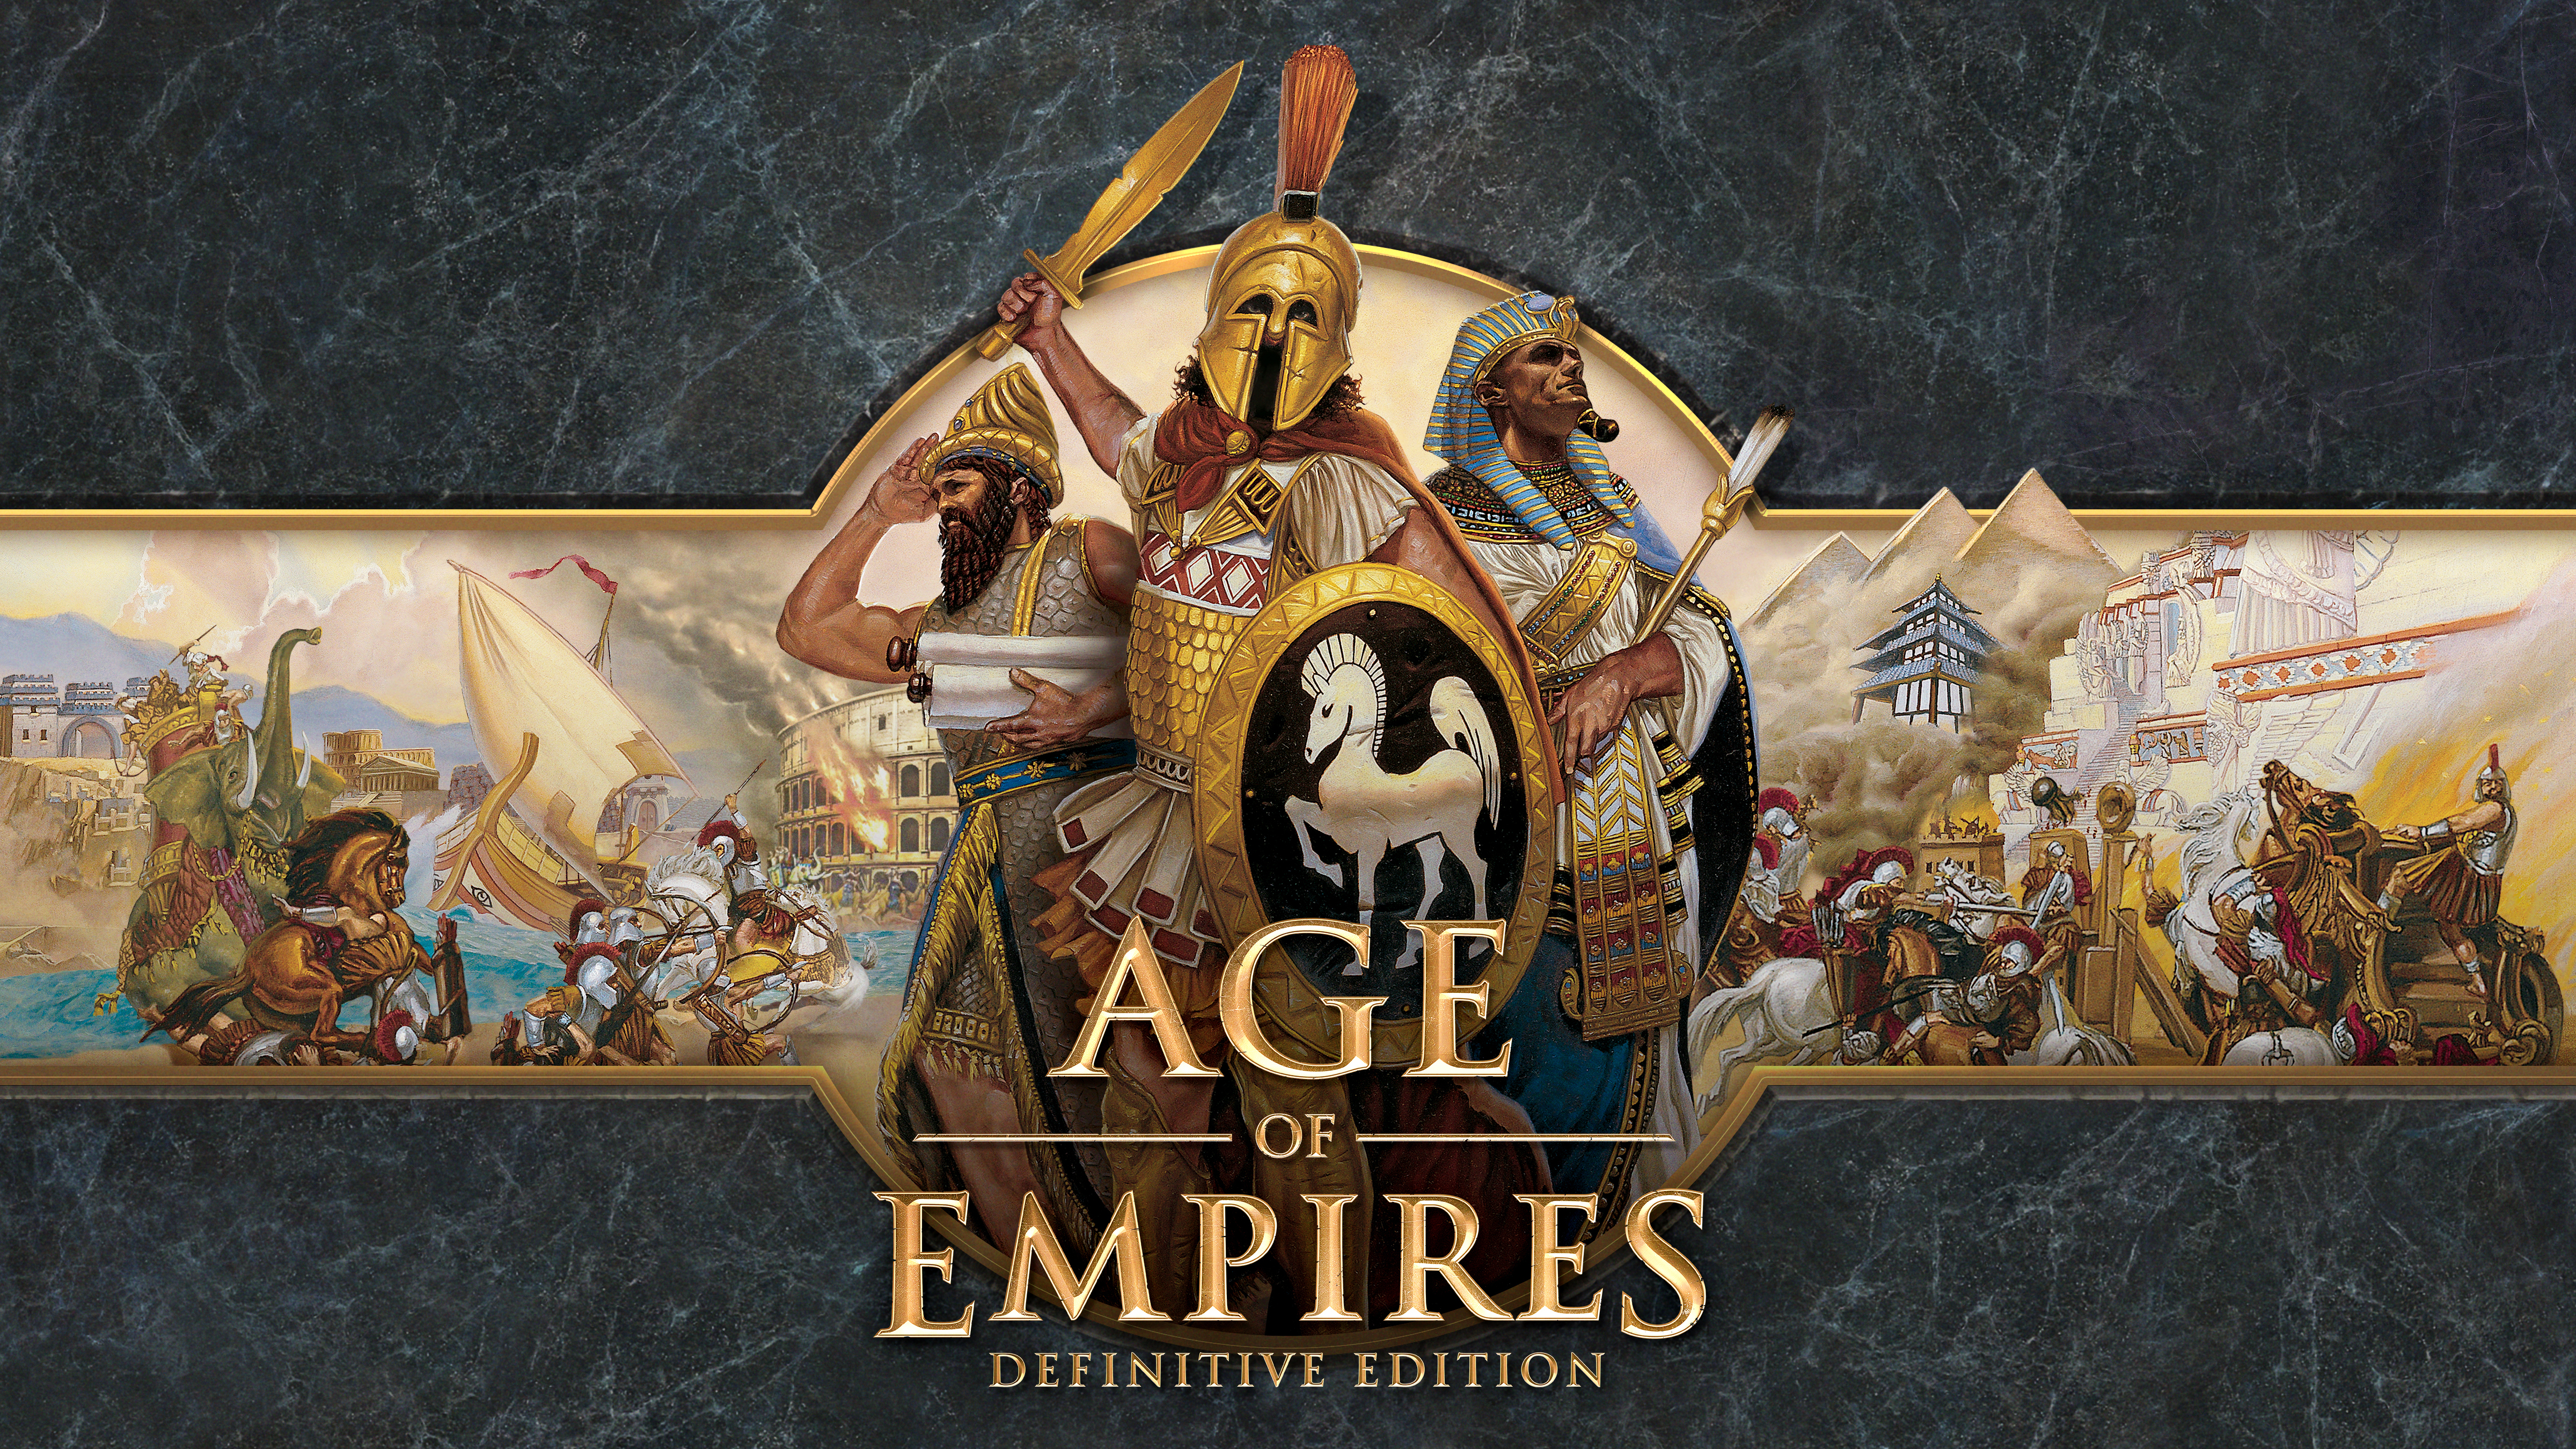 Age of Empires game art